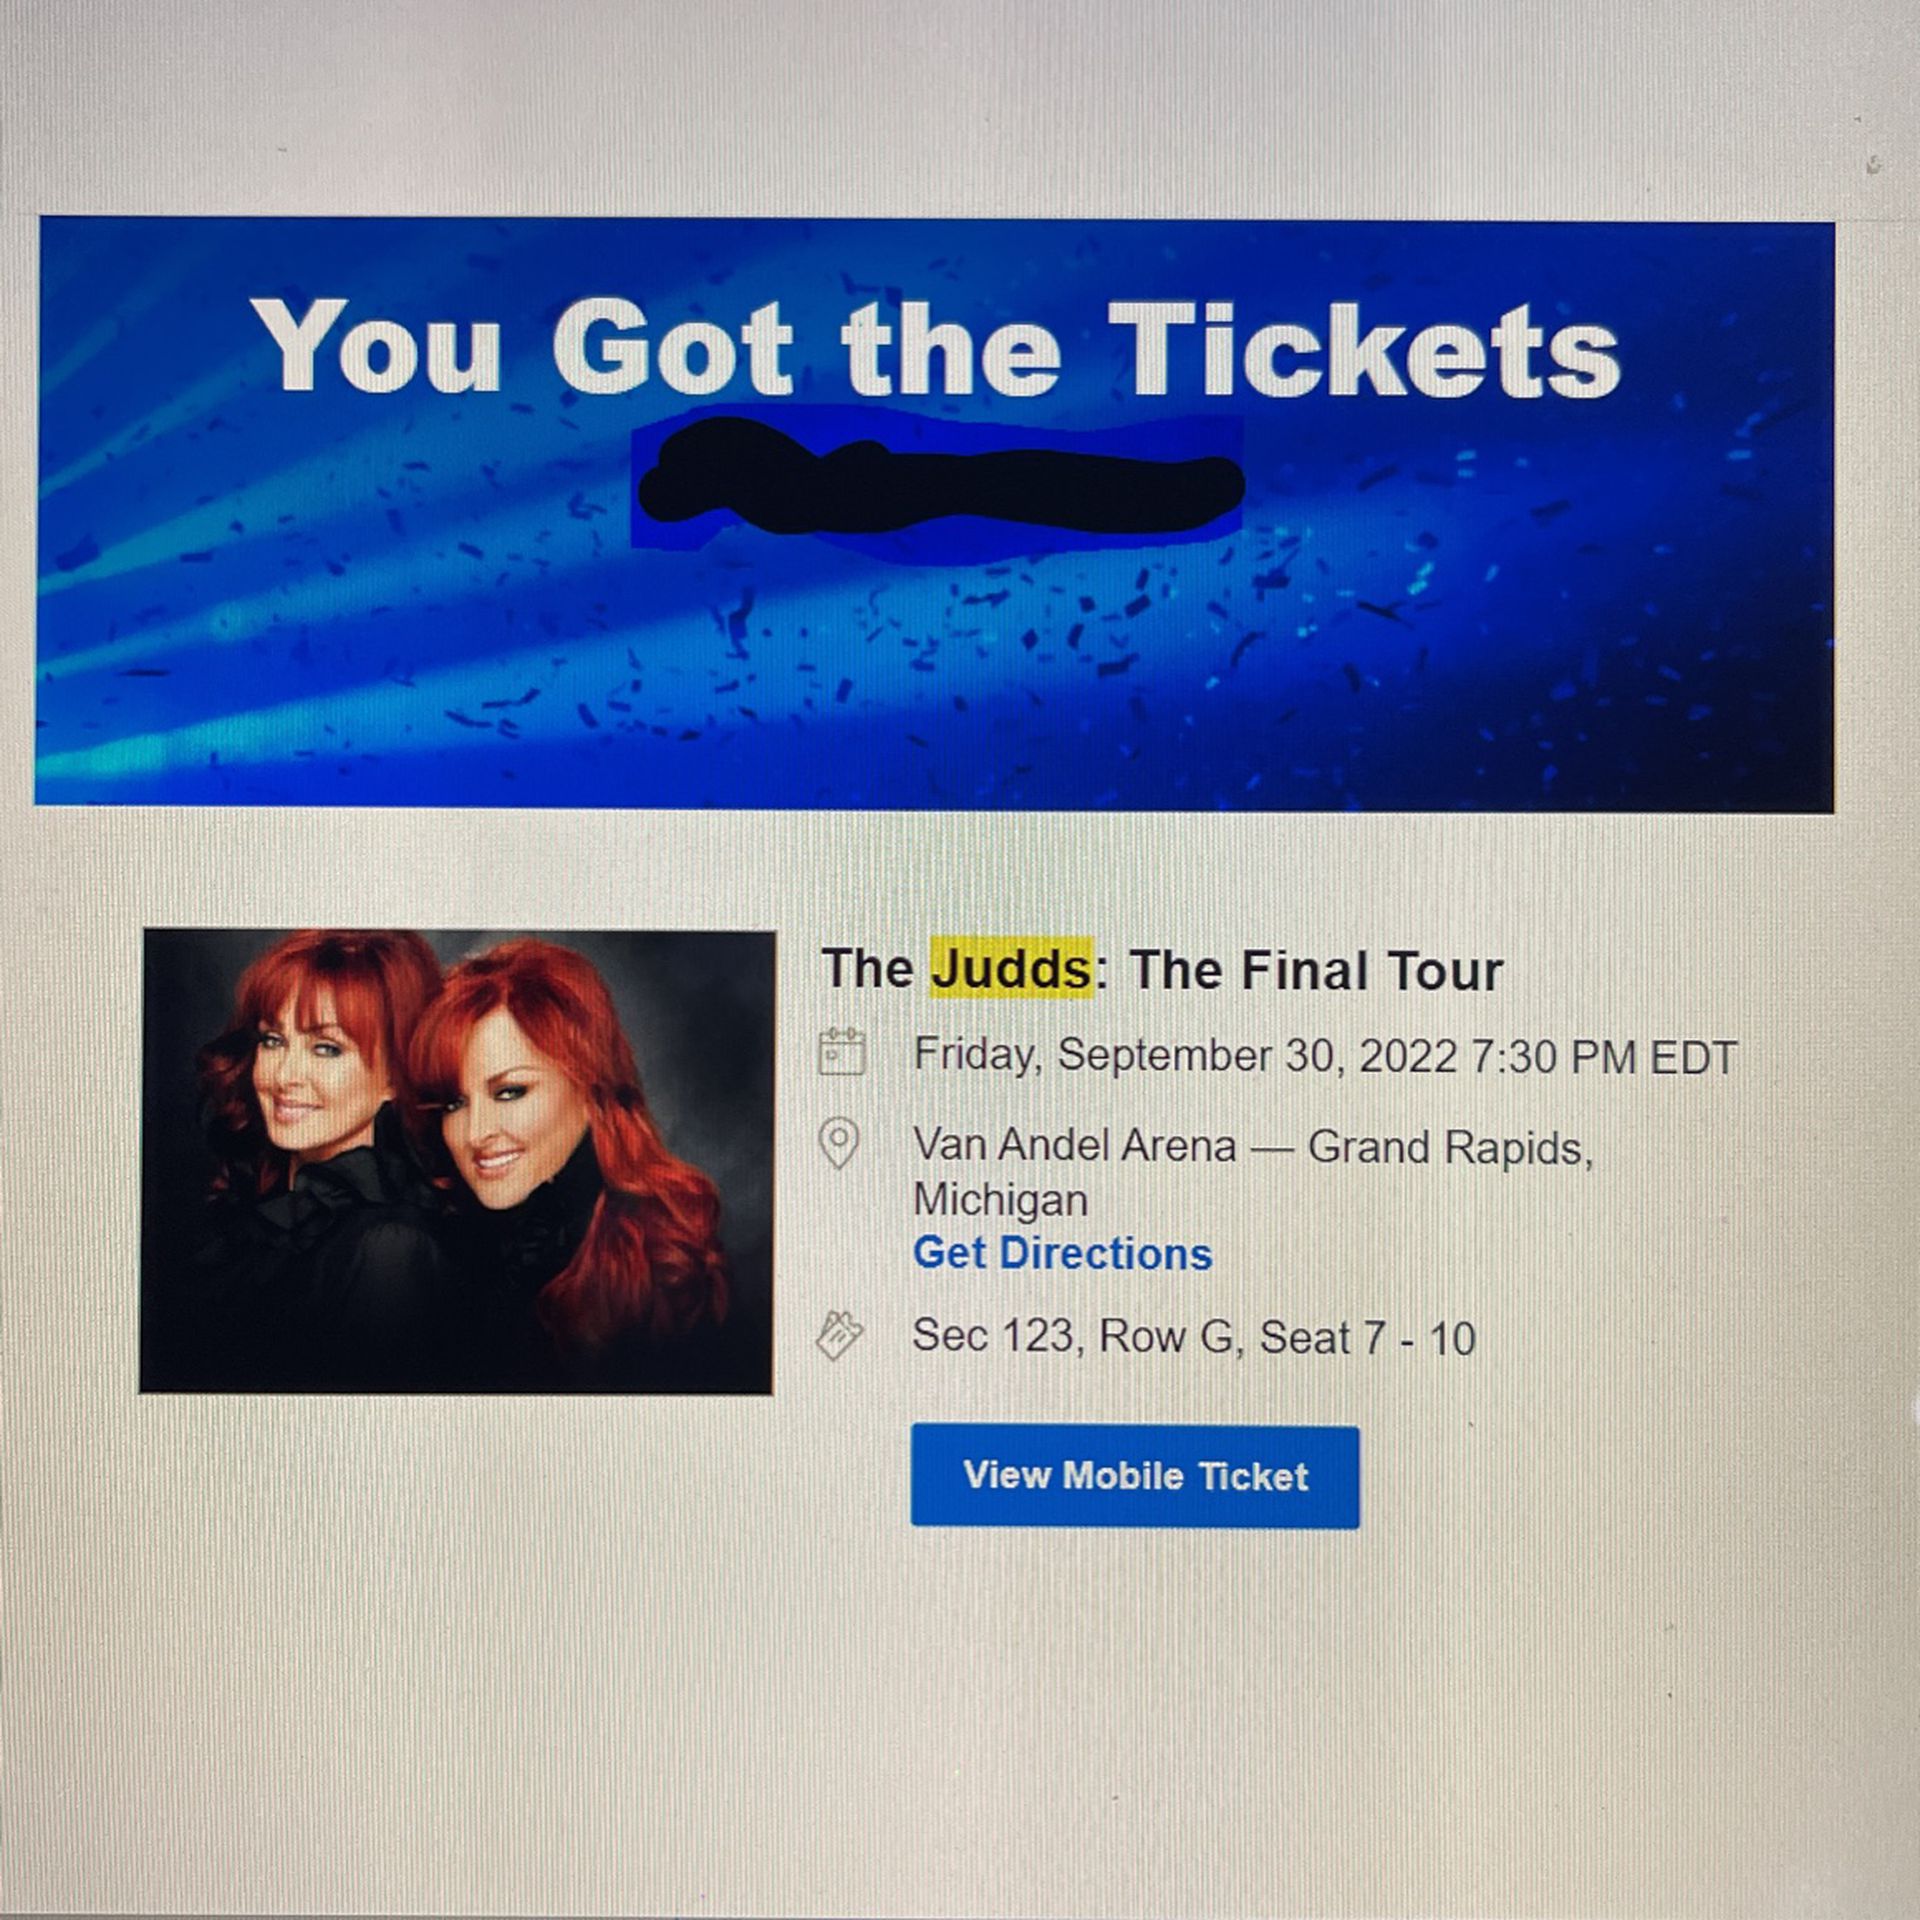 The Judds: The Final Tour - 4 Tickets Sept 30th